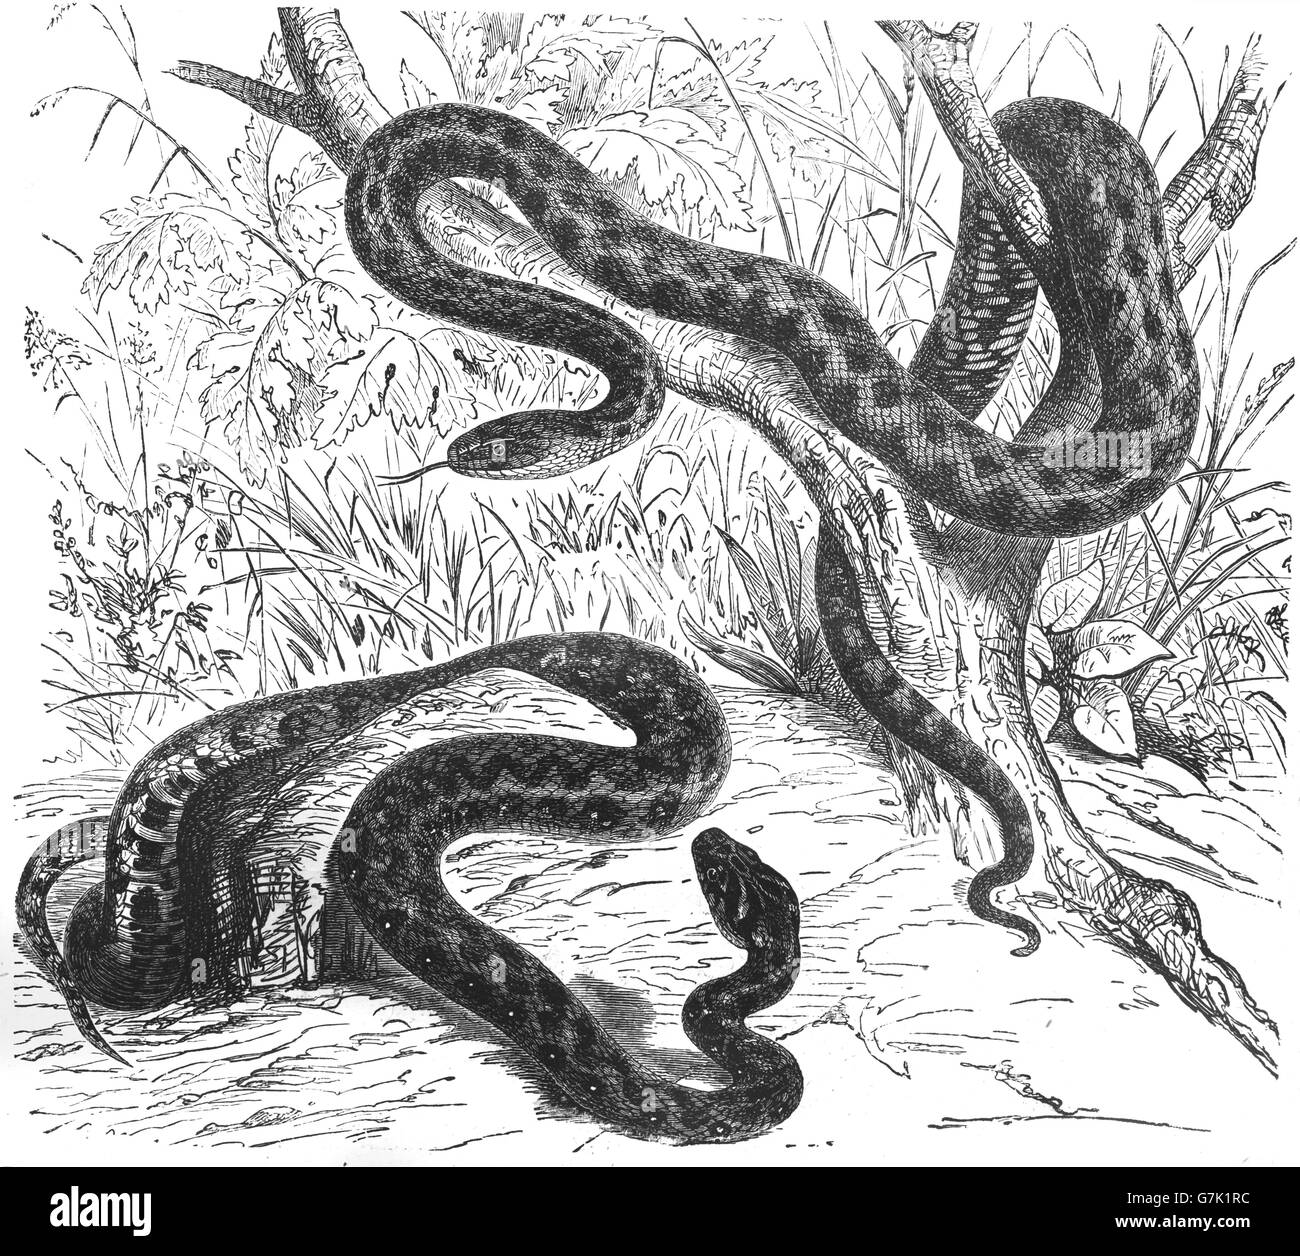 Dice snake, Natrix tessellata and Viperine water snake, Natrix maura, illustration from book dated 1904 Stock Photo